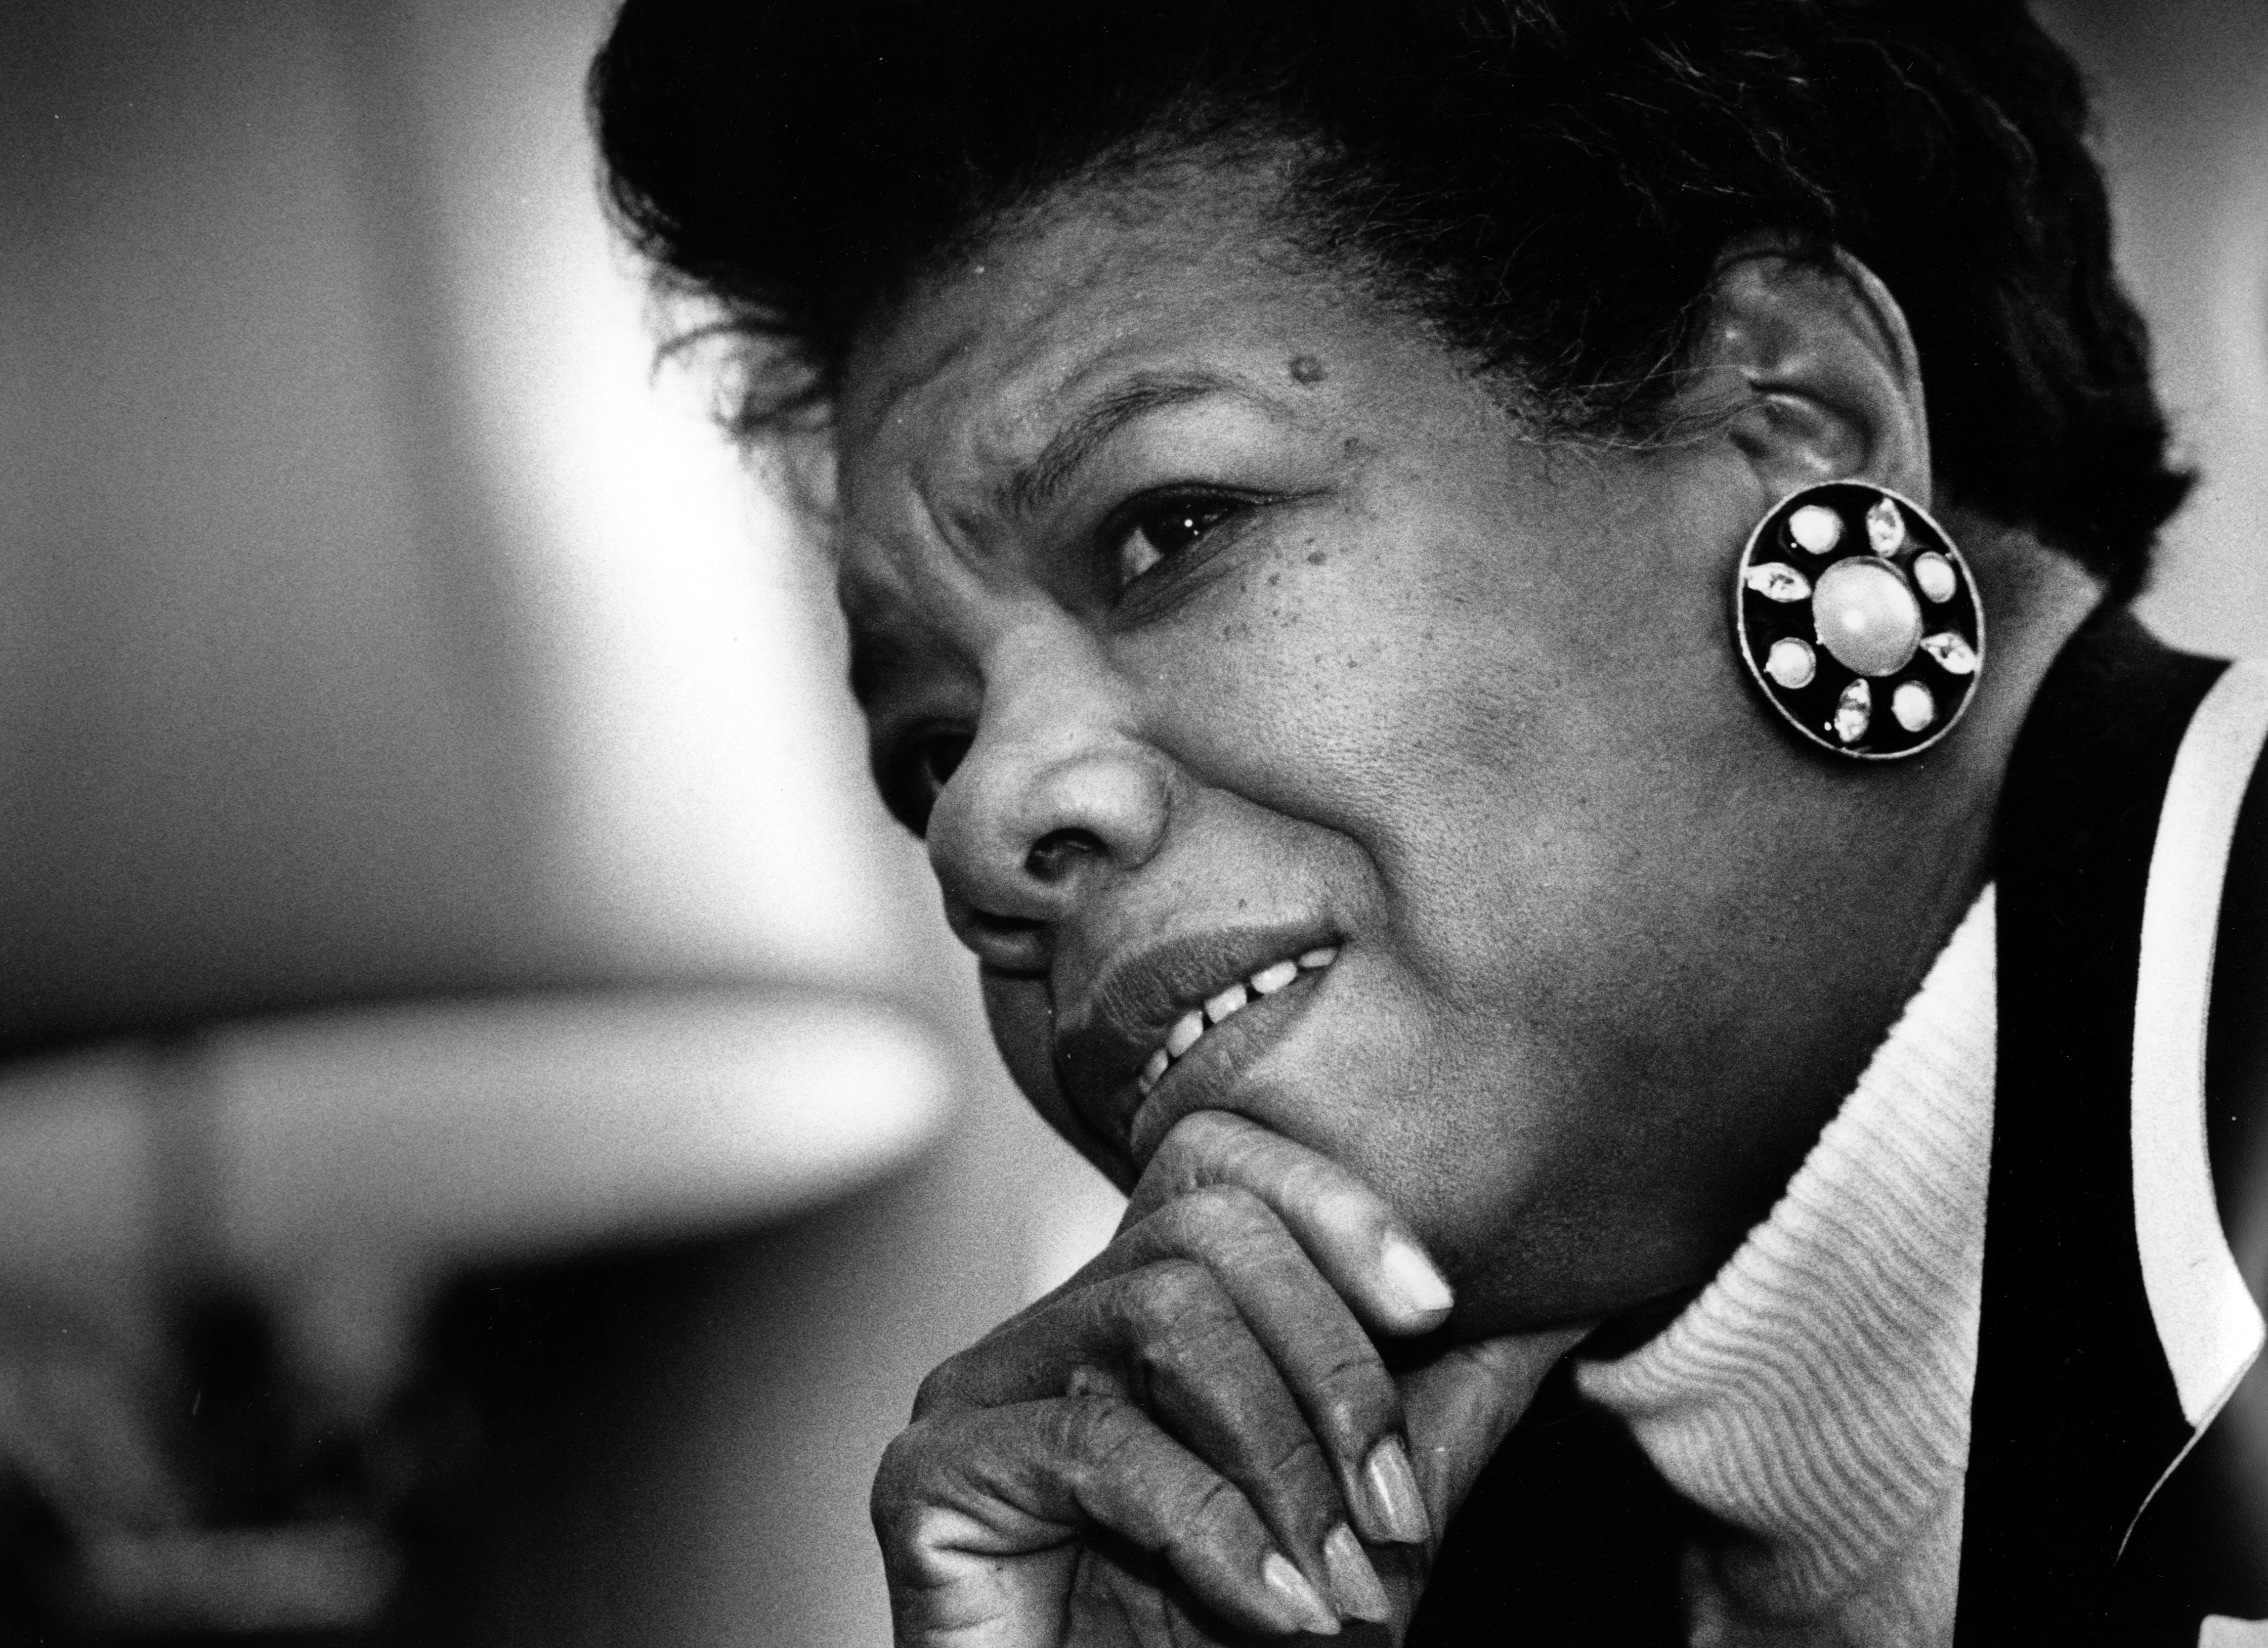 Author and poet, Maya Angelou, poses for a portrait in Washington, D.C. on December 15, 1992 